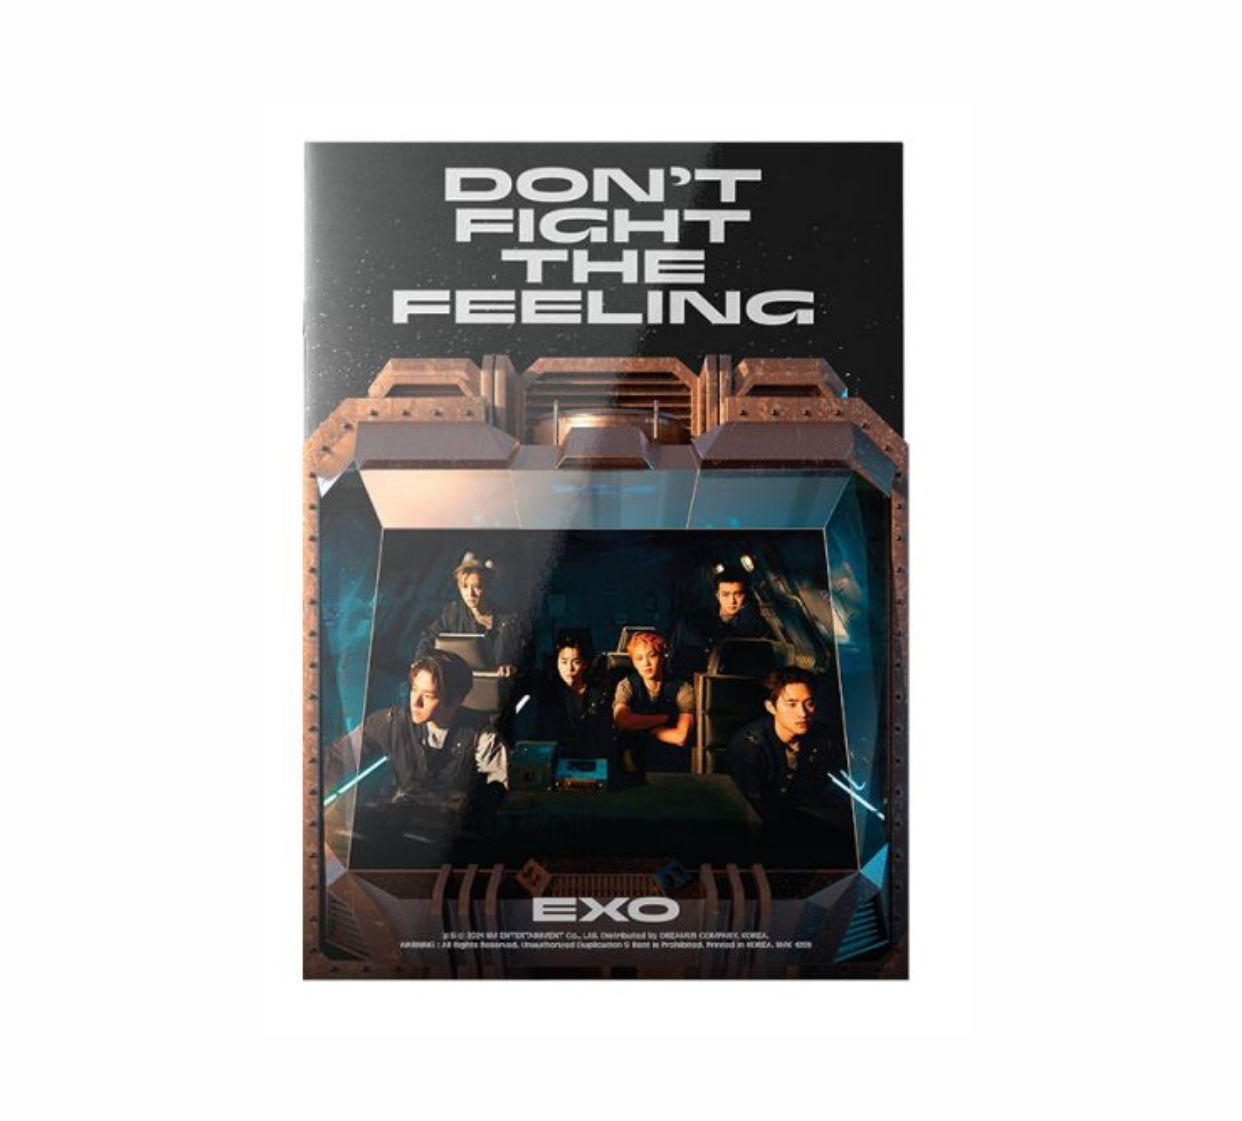 Exo - Special album [Don´t fight the feeling] Photo book ver Episode 2